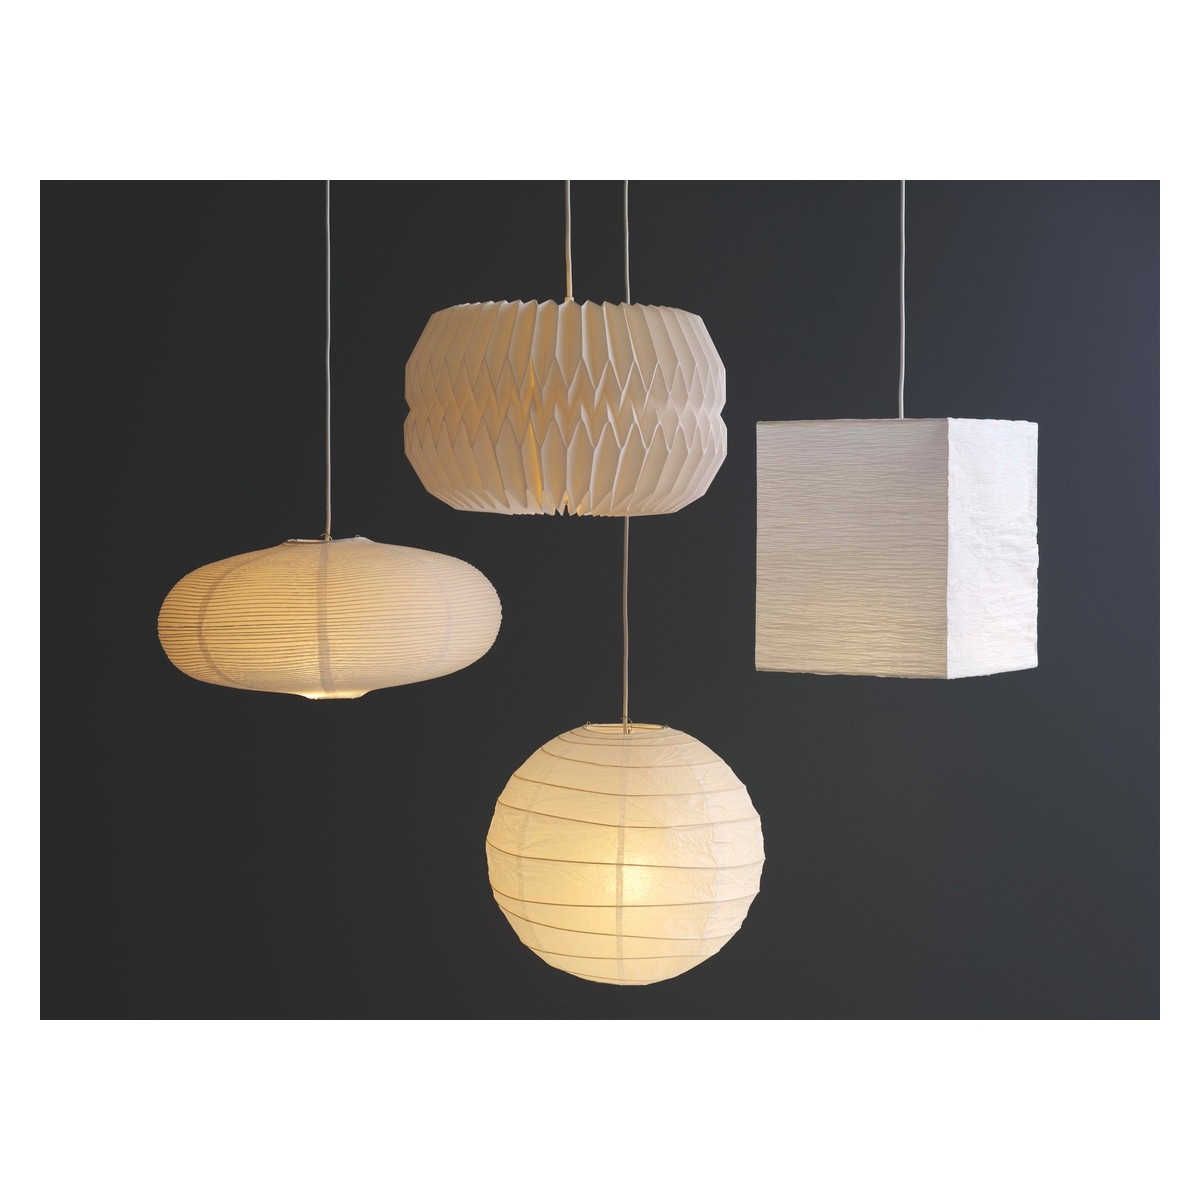 Large Paper Ceiling Light Shades1200 X 1200